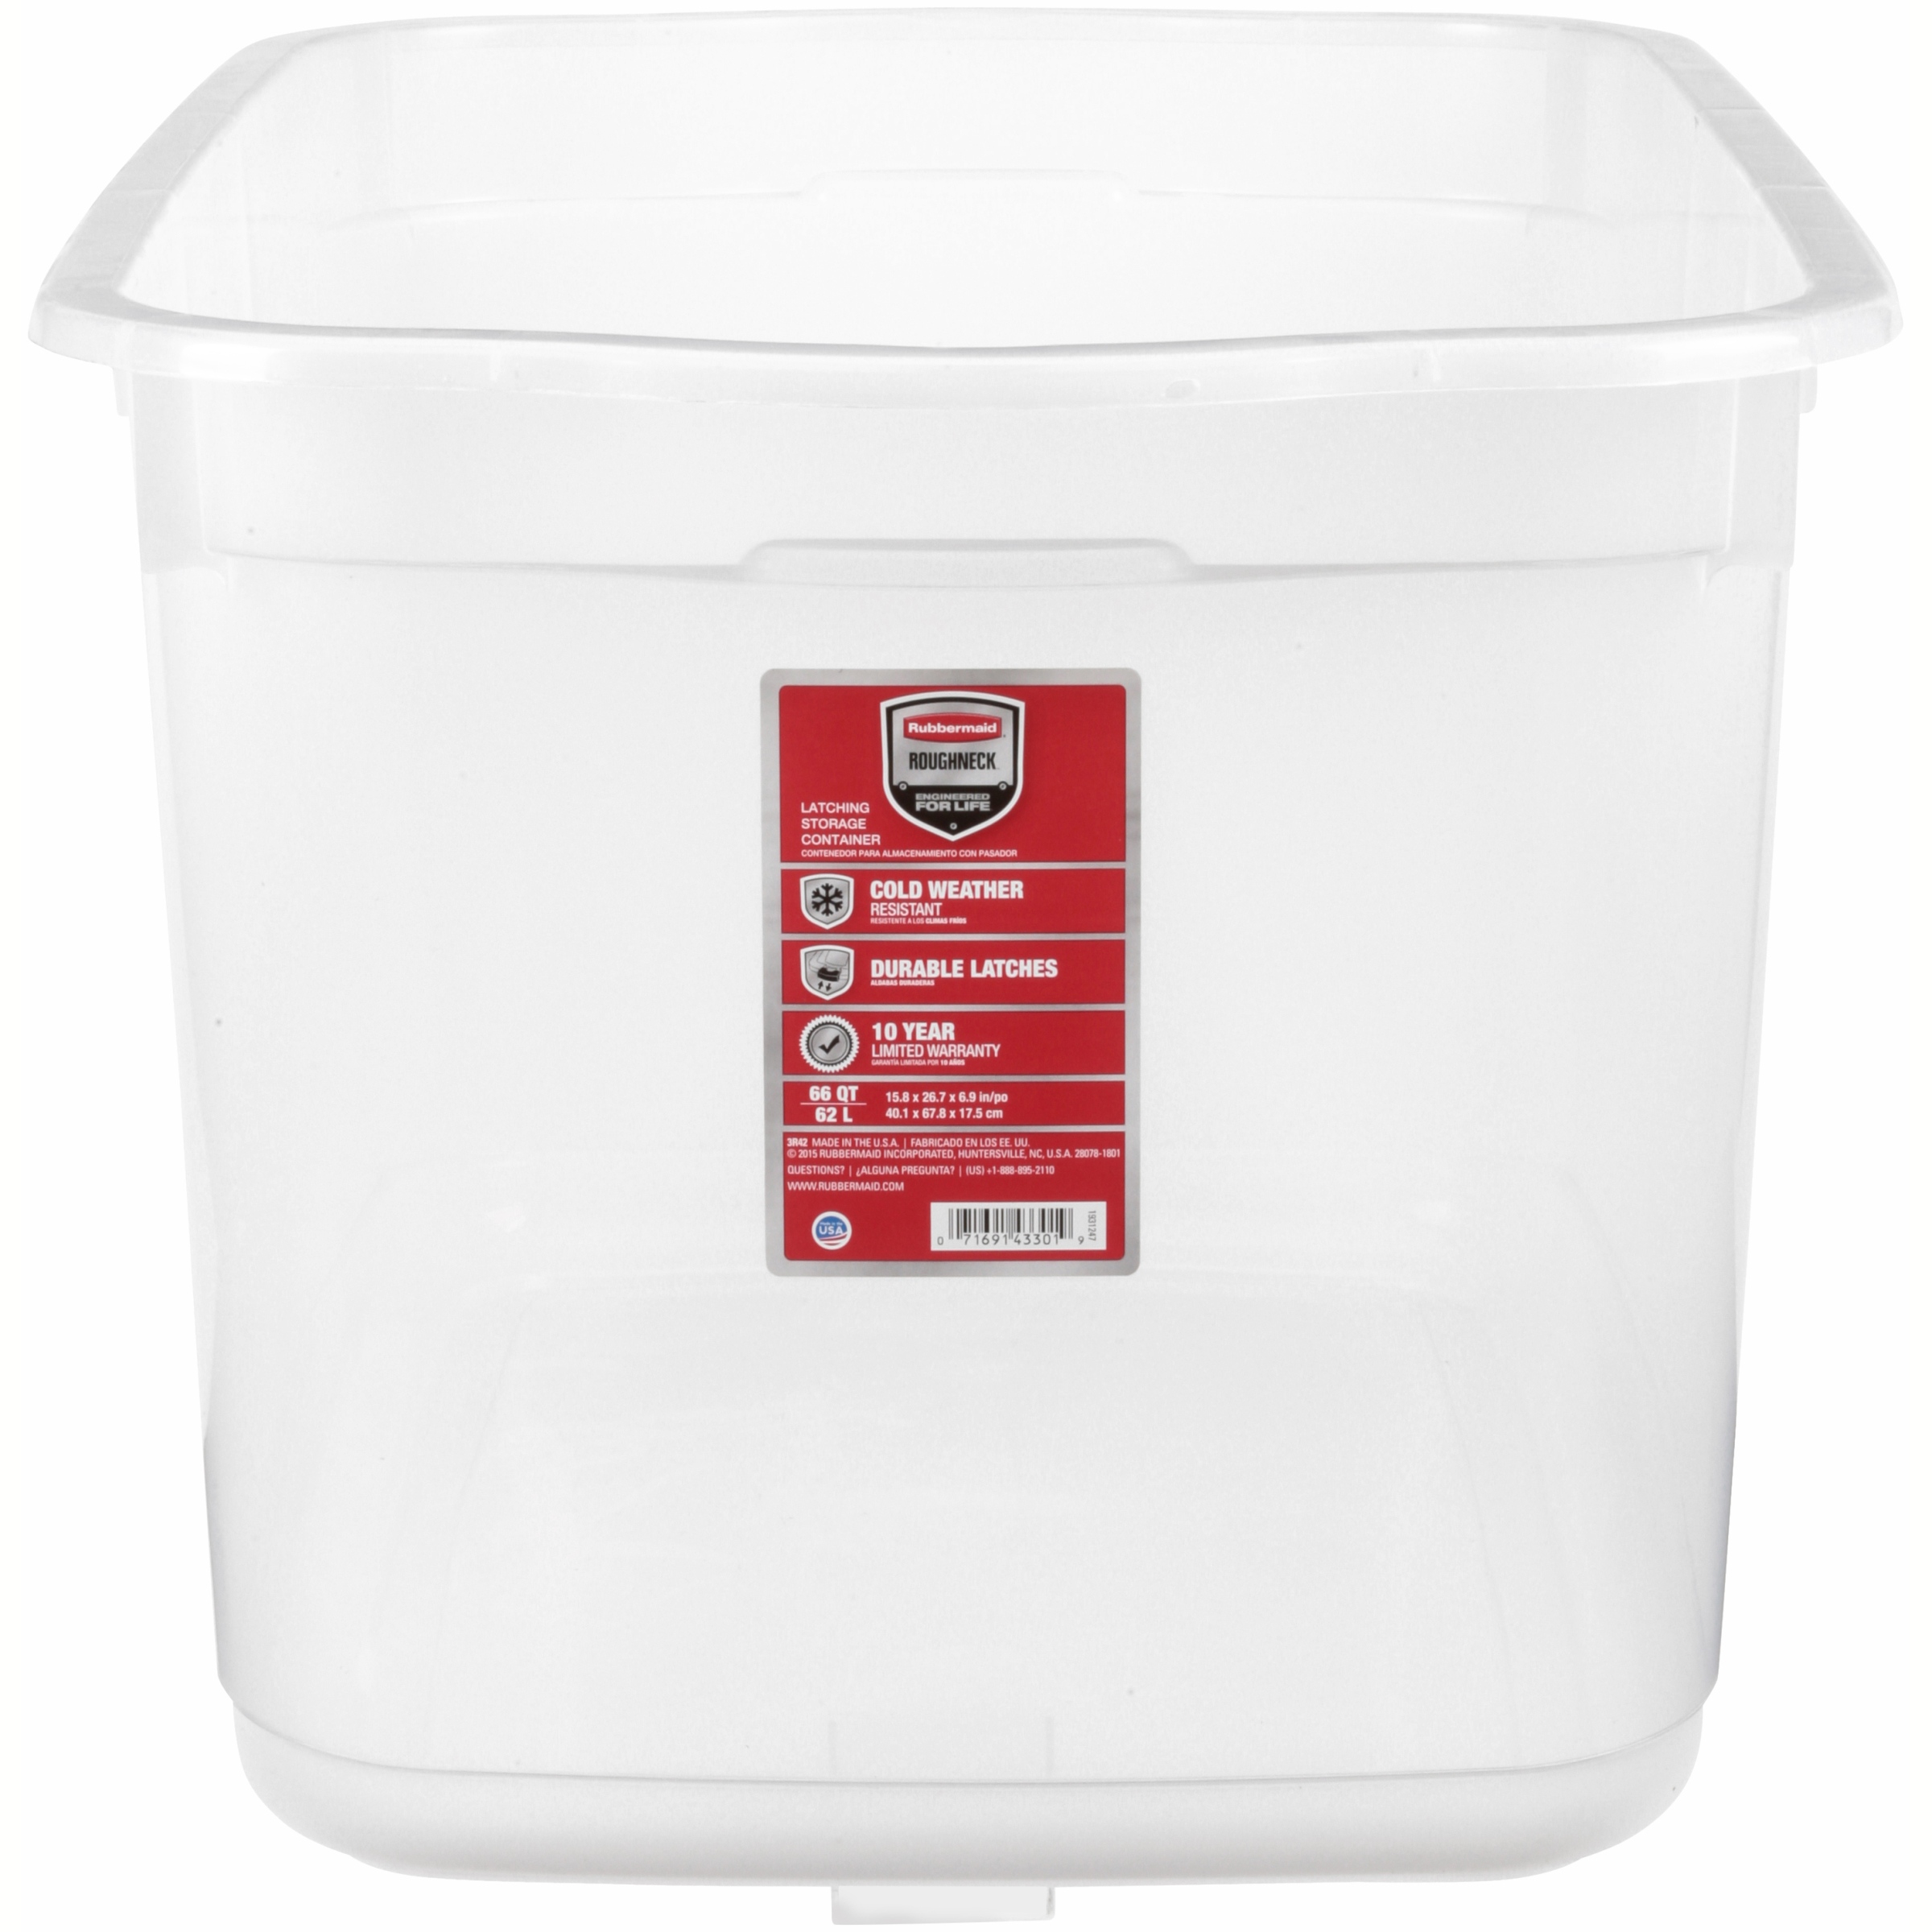 Rubbermaid Roughneck 66 Qt. (16.5 Gal) Clear Storage Tote Bin, Clear with Blue Lid - image 3 of 3